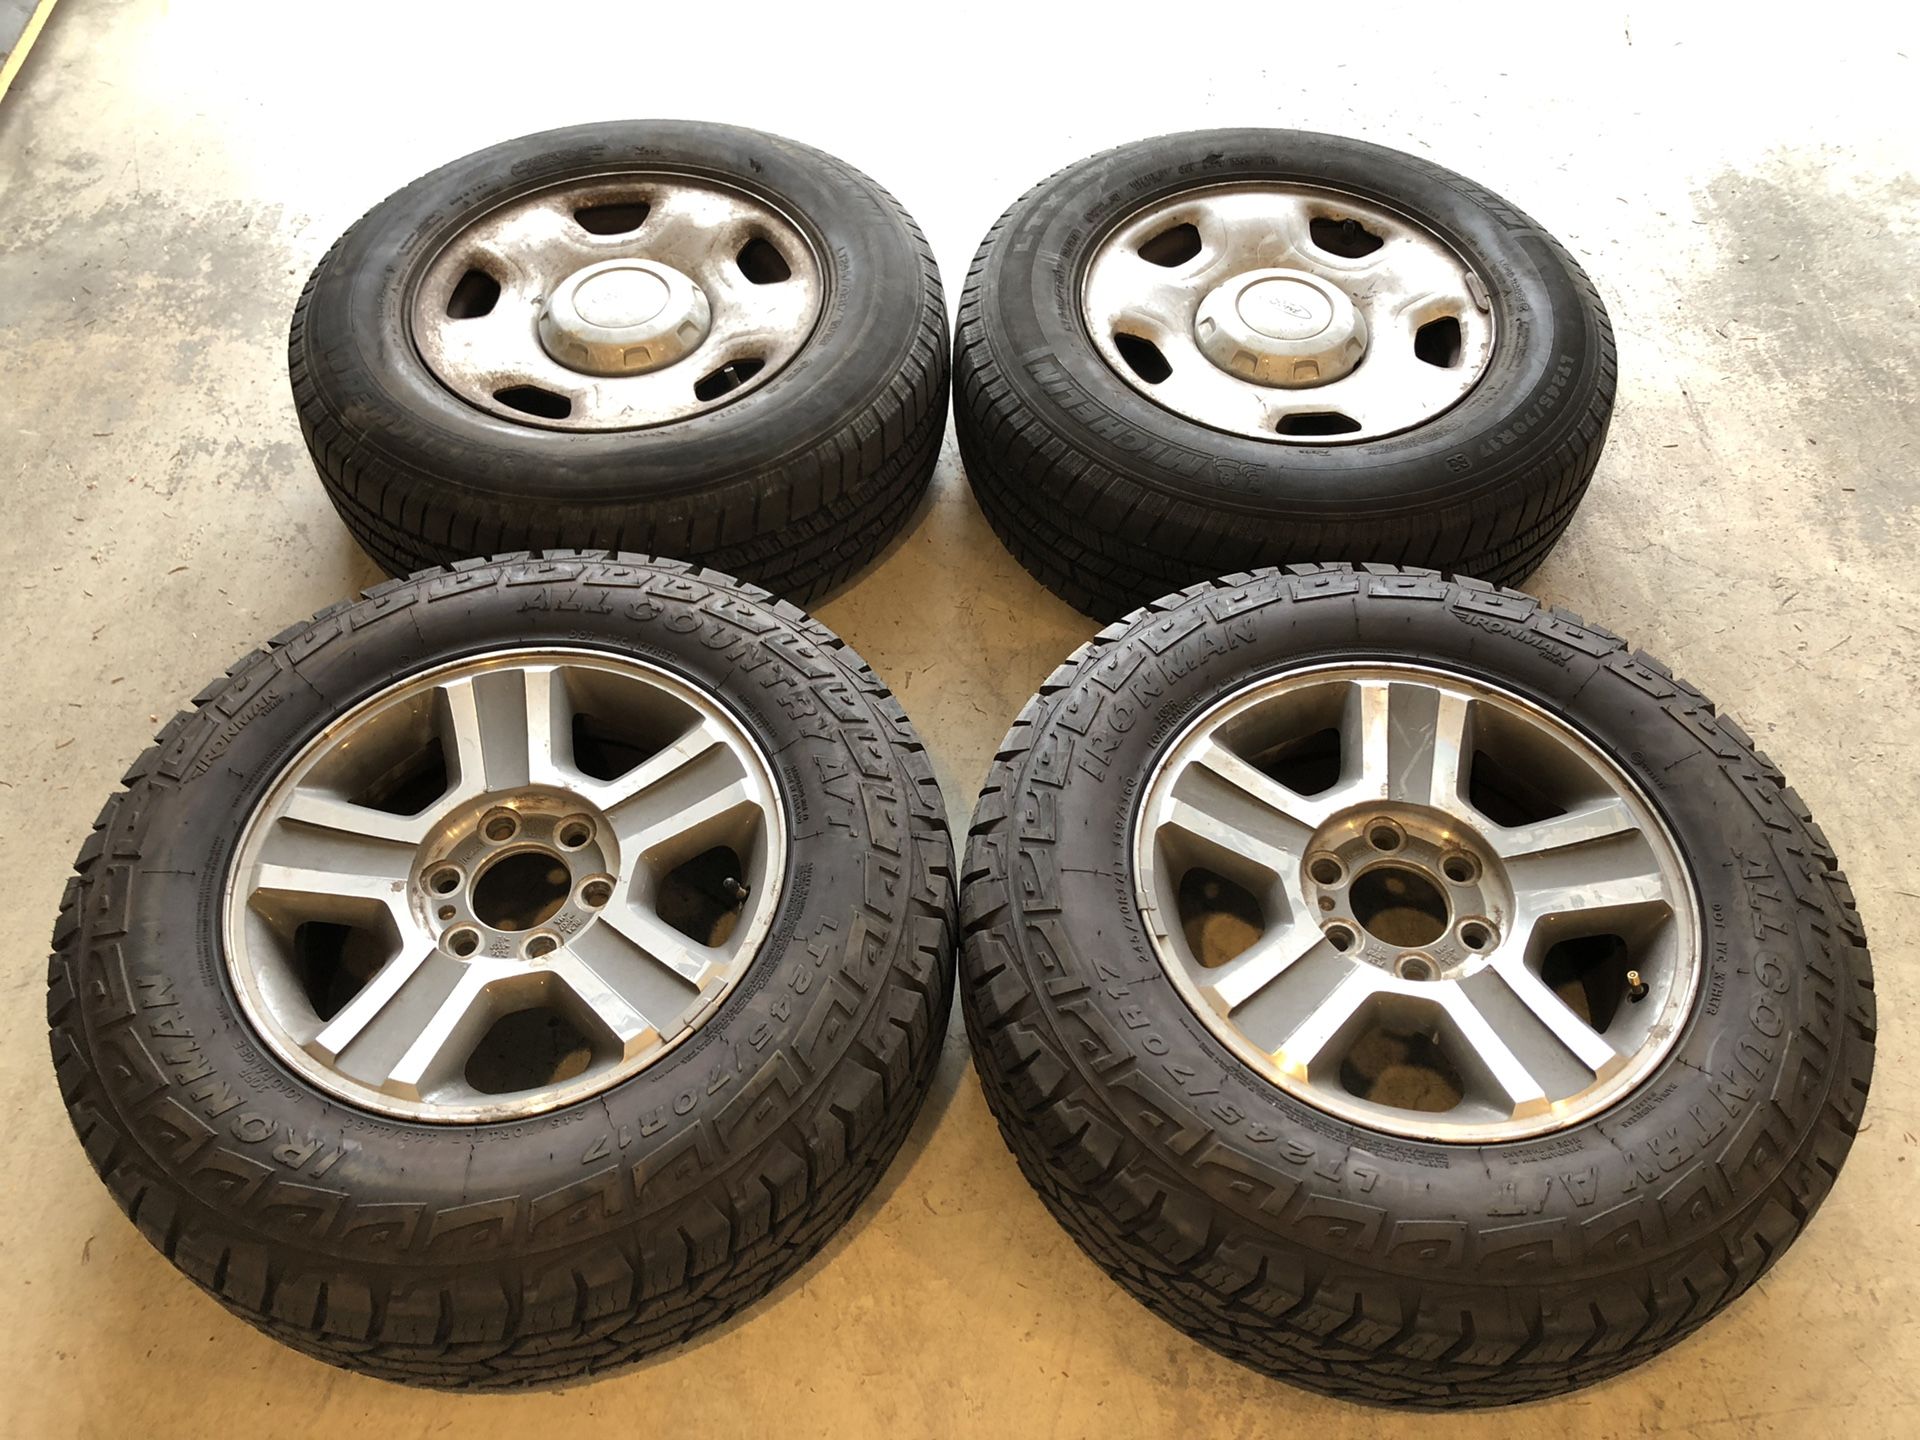 Stock F-150 Rims / Wheels with new tires